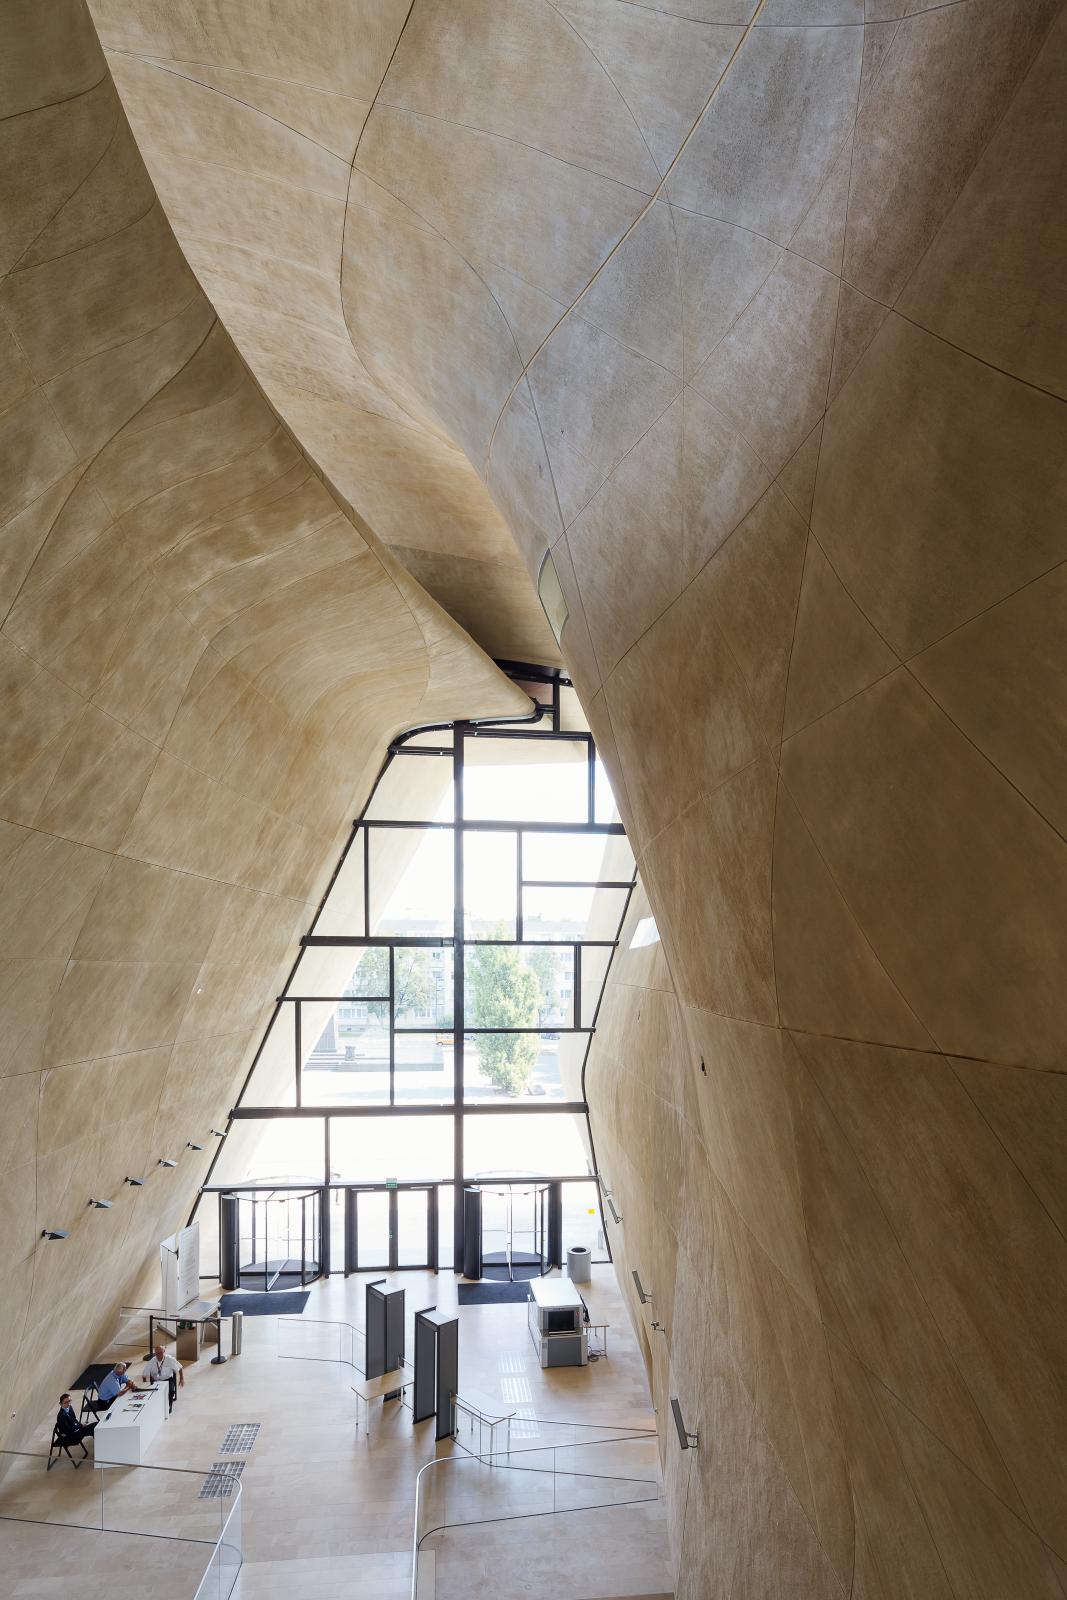 Photograph of POLIN Museum of the History of Polish Jews, designed by Lahdelma & Mahlamäki Architects and located in Warsaw, Poland